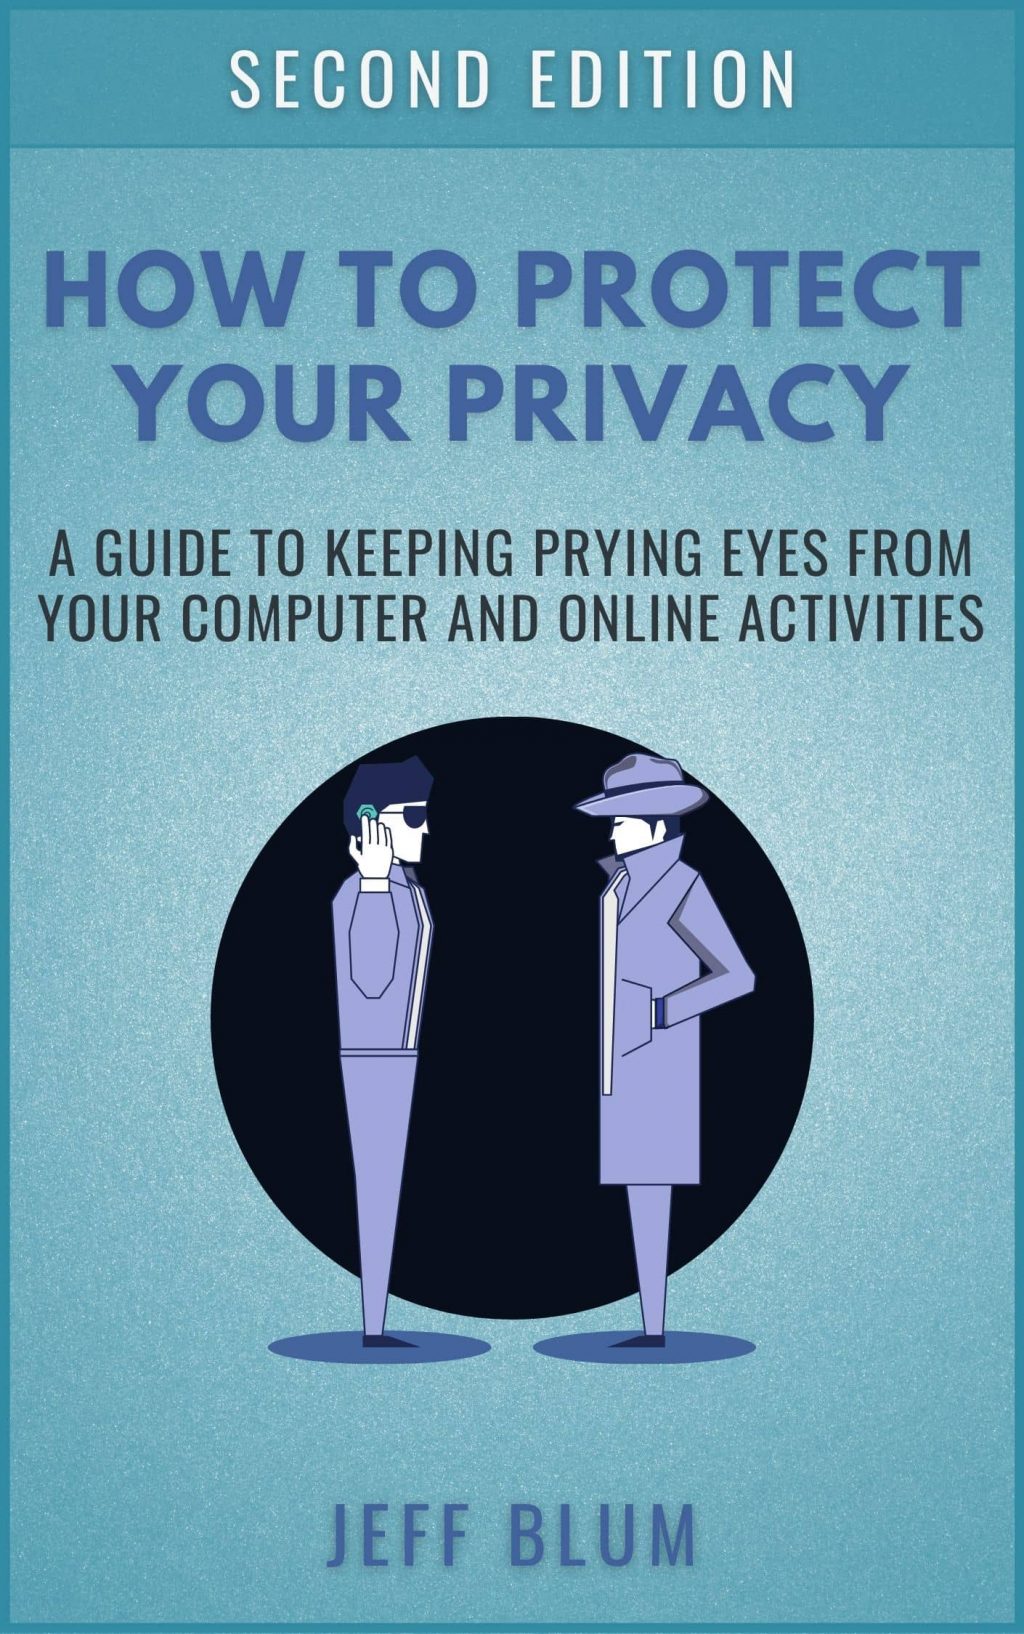 How to Protect Your Privacy